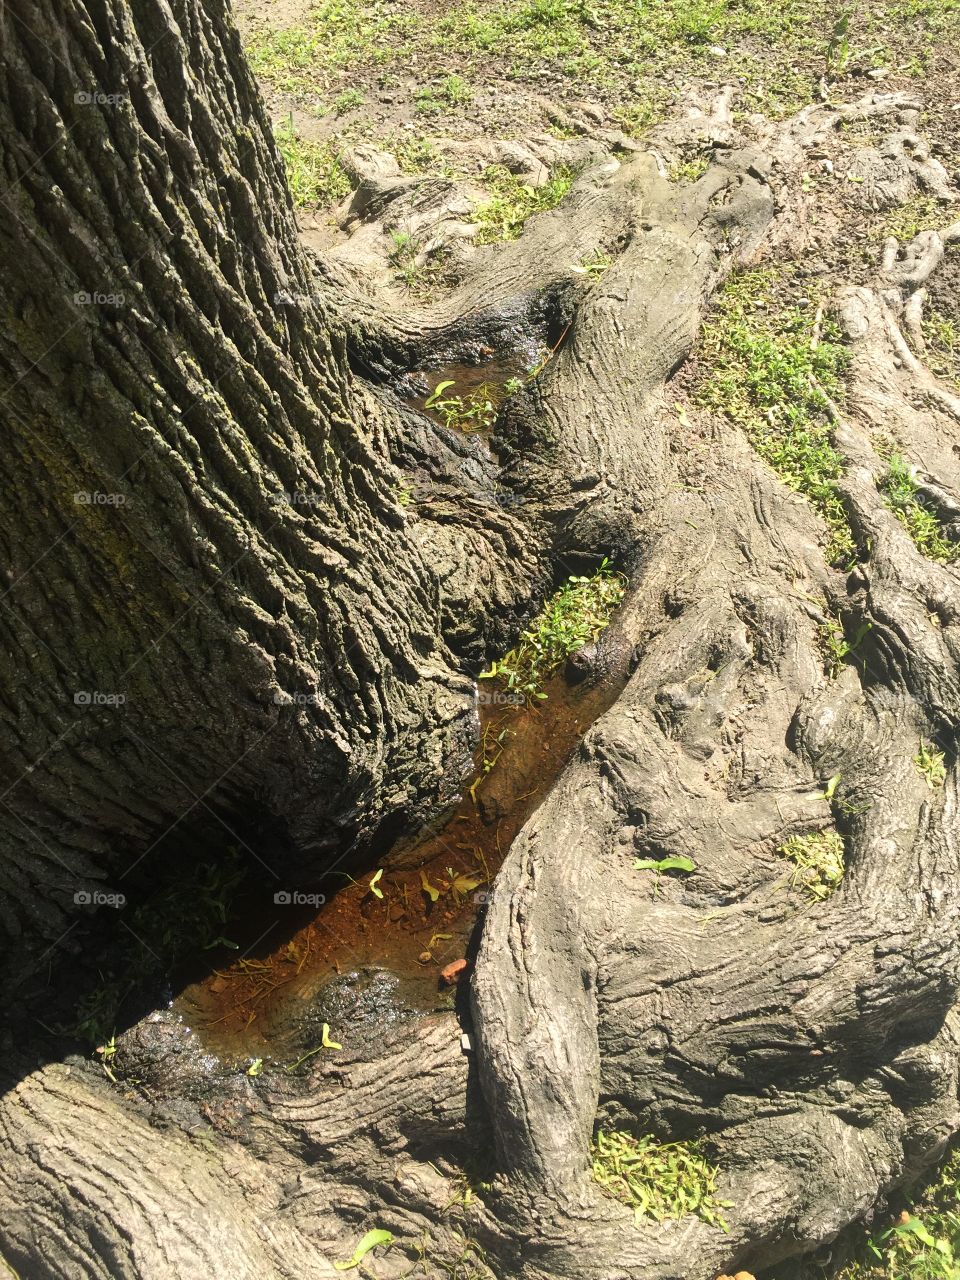 Trunk roots and water